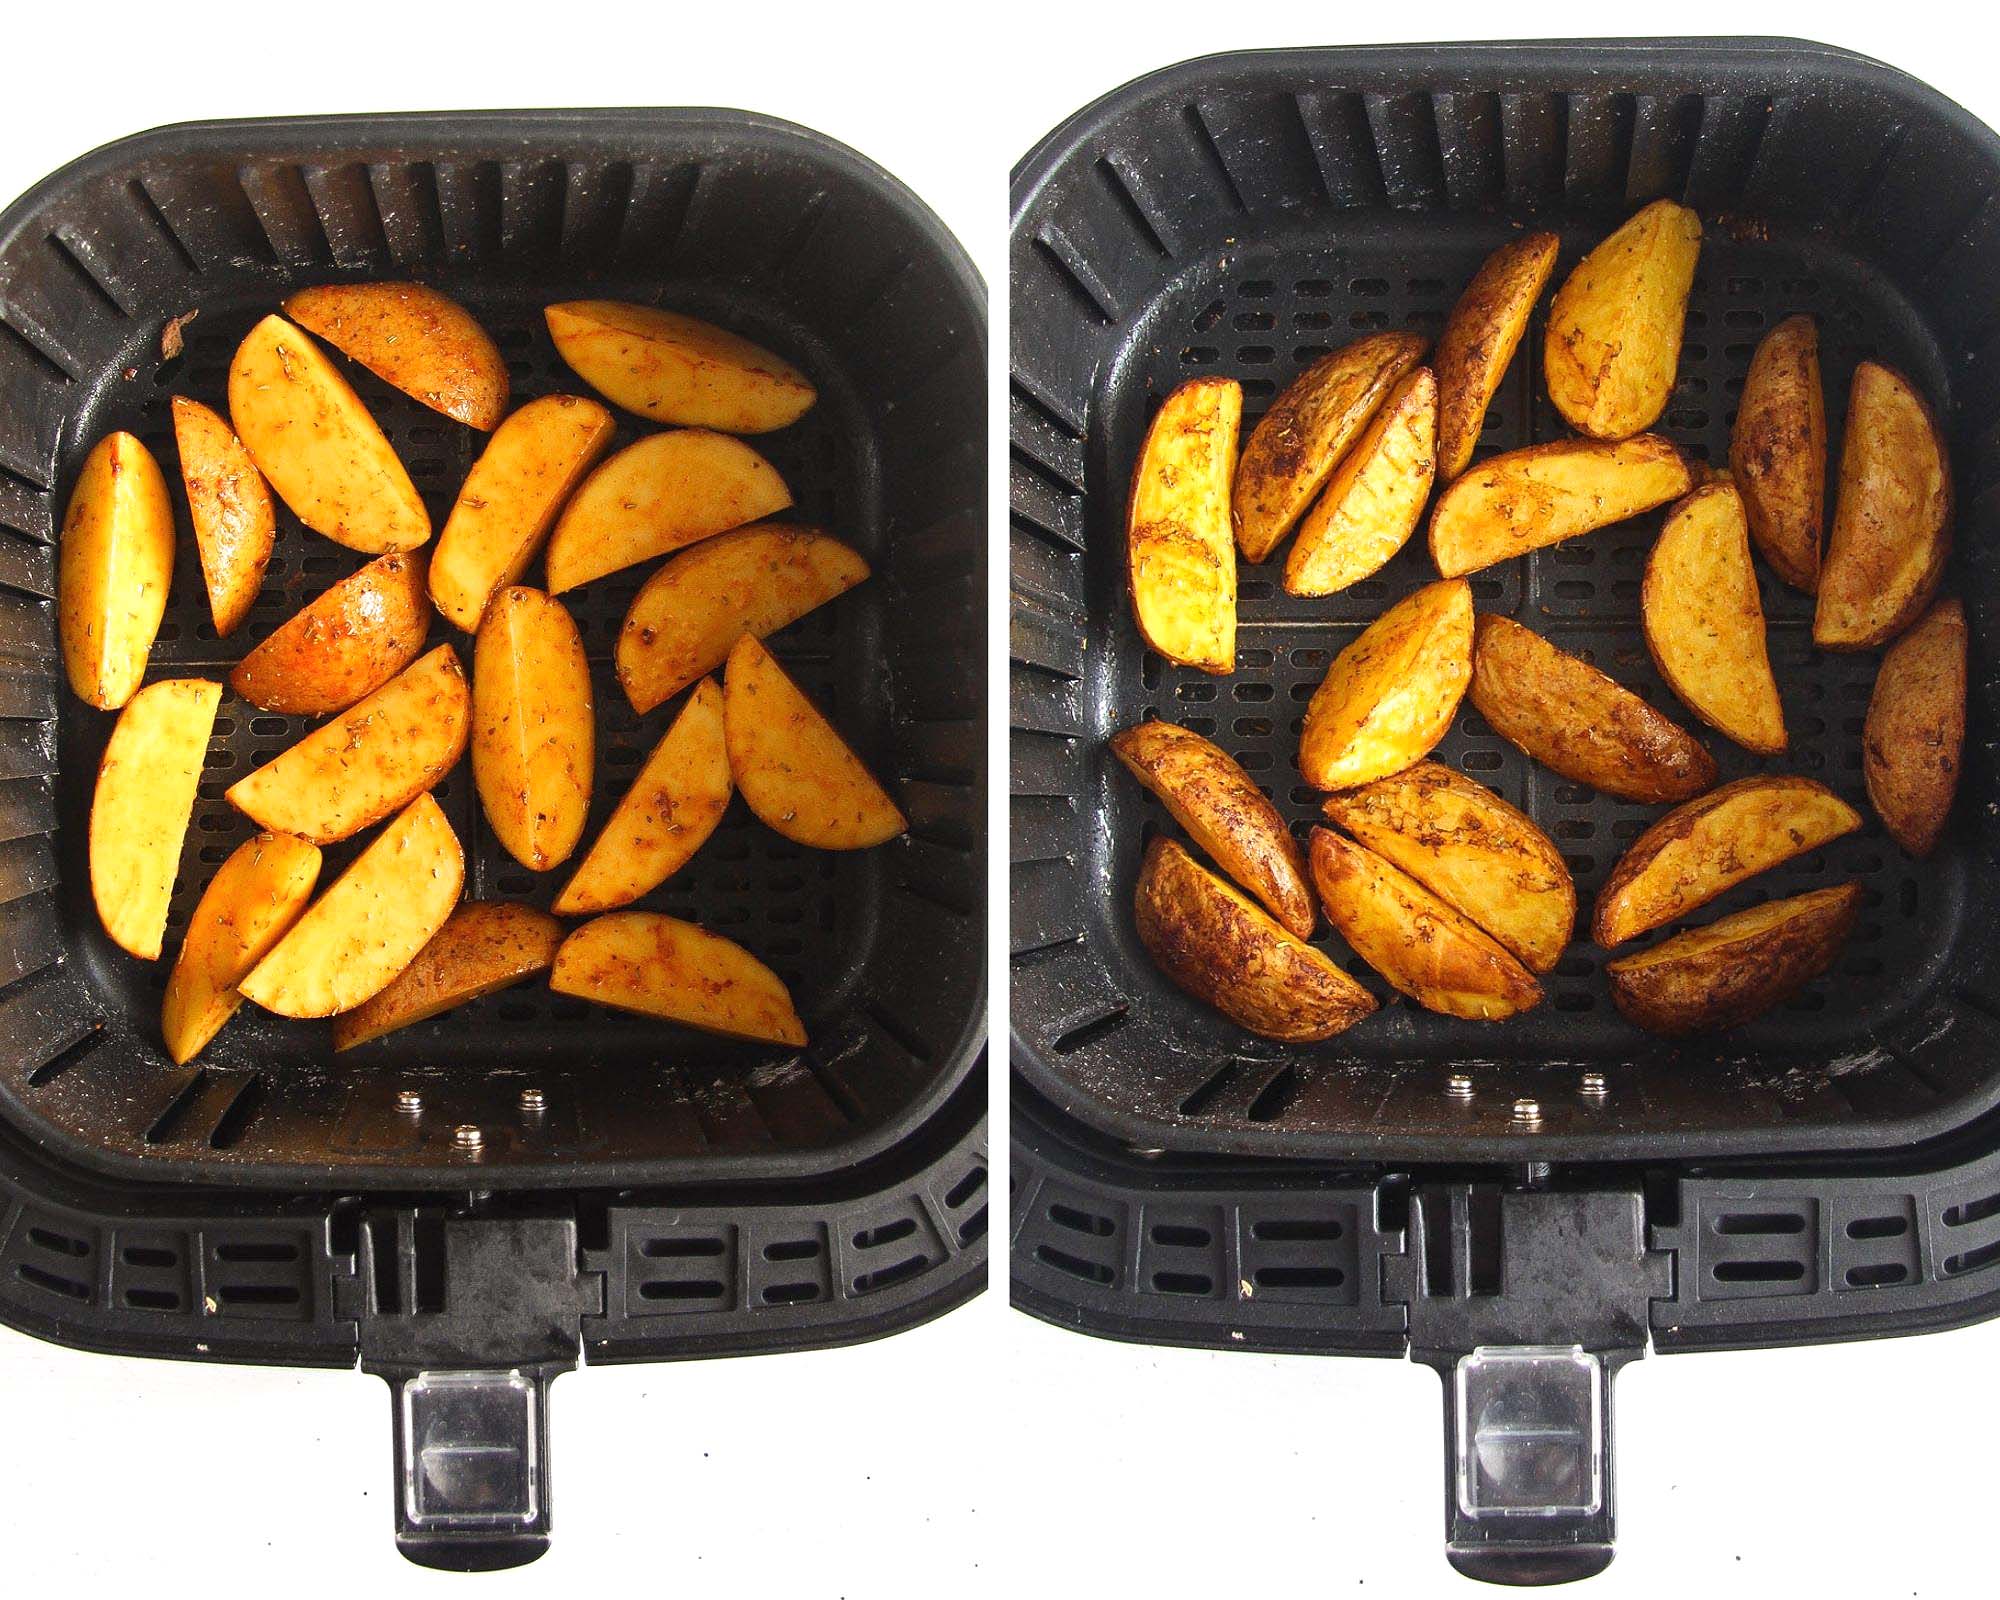 potatoes in the basket of an air fryer before and after cooking